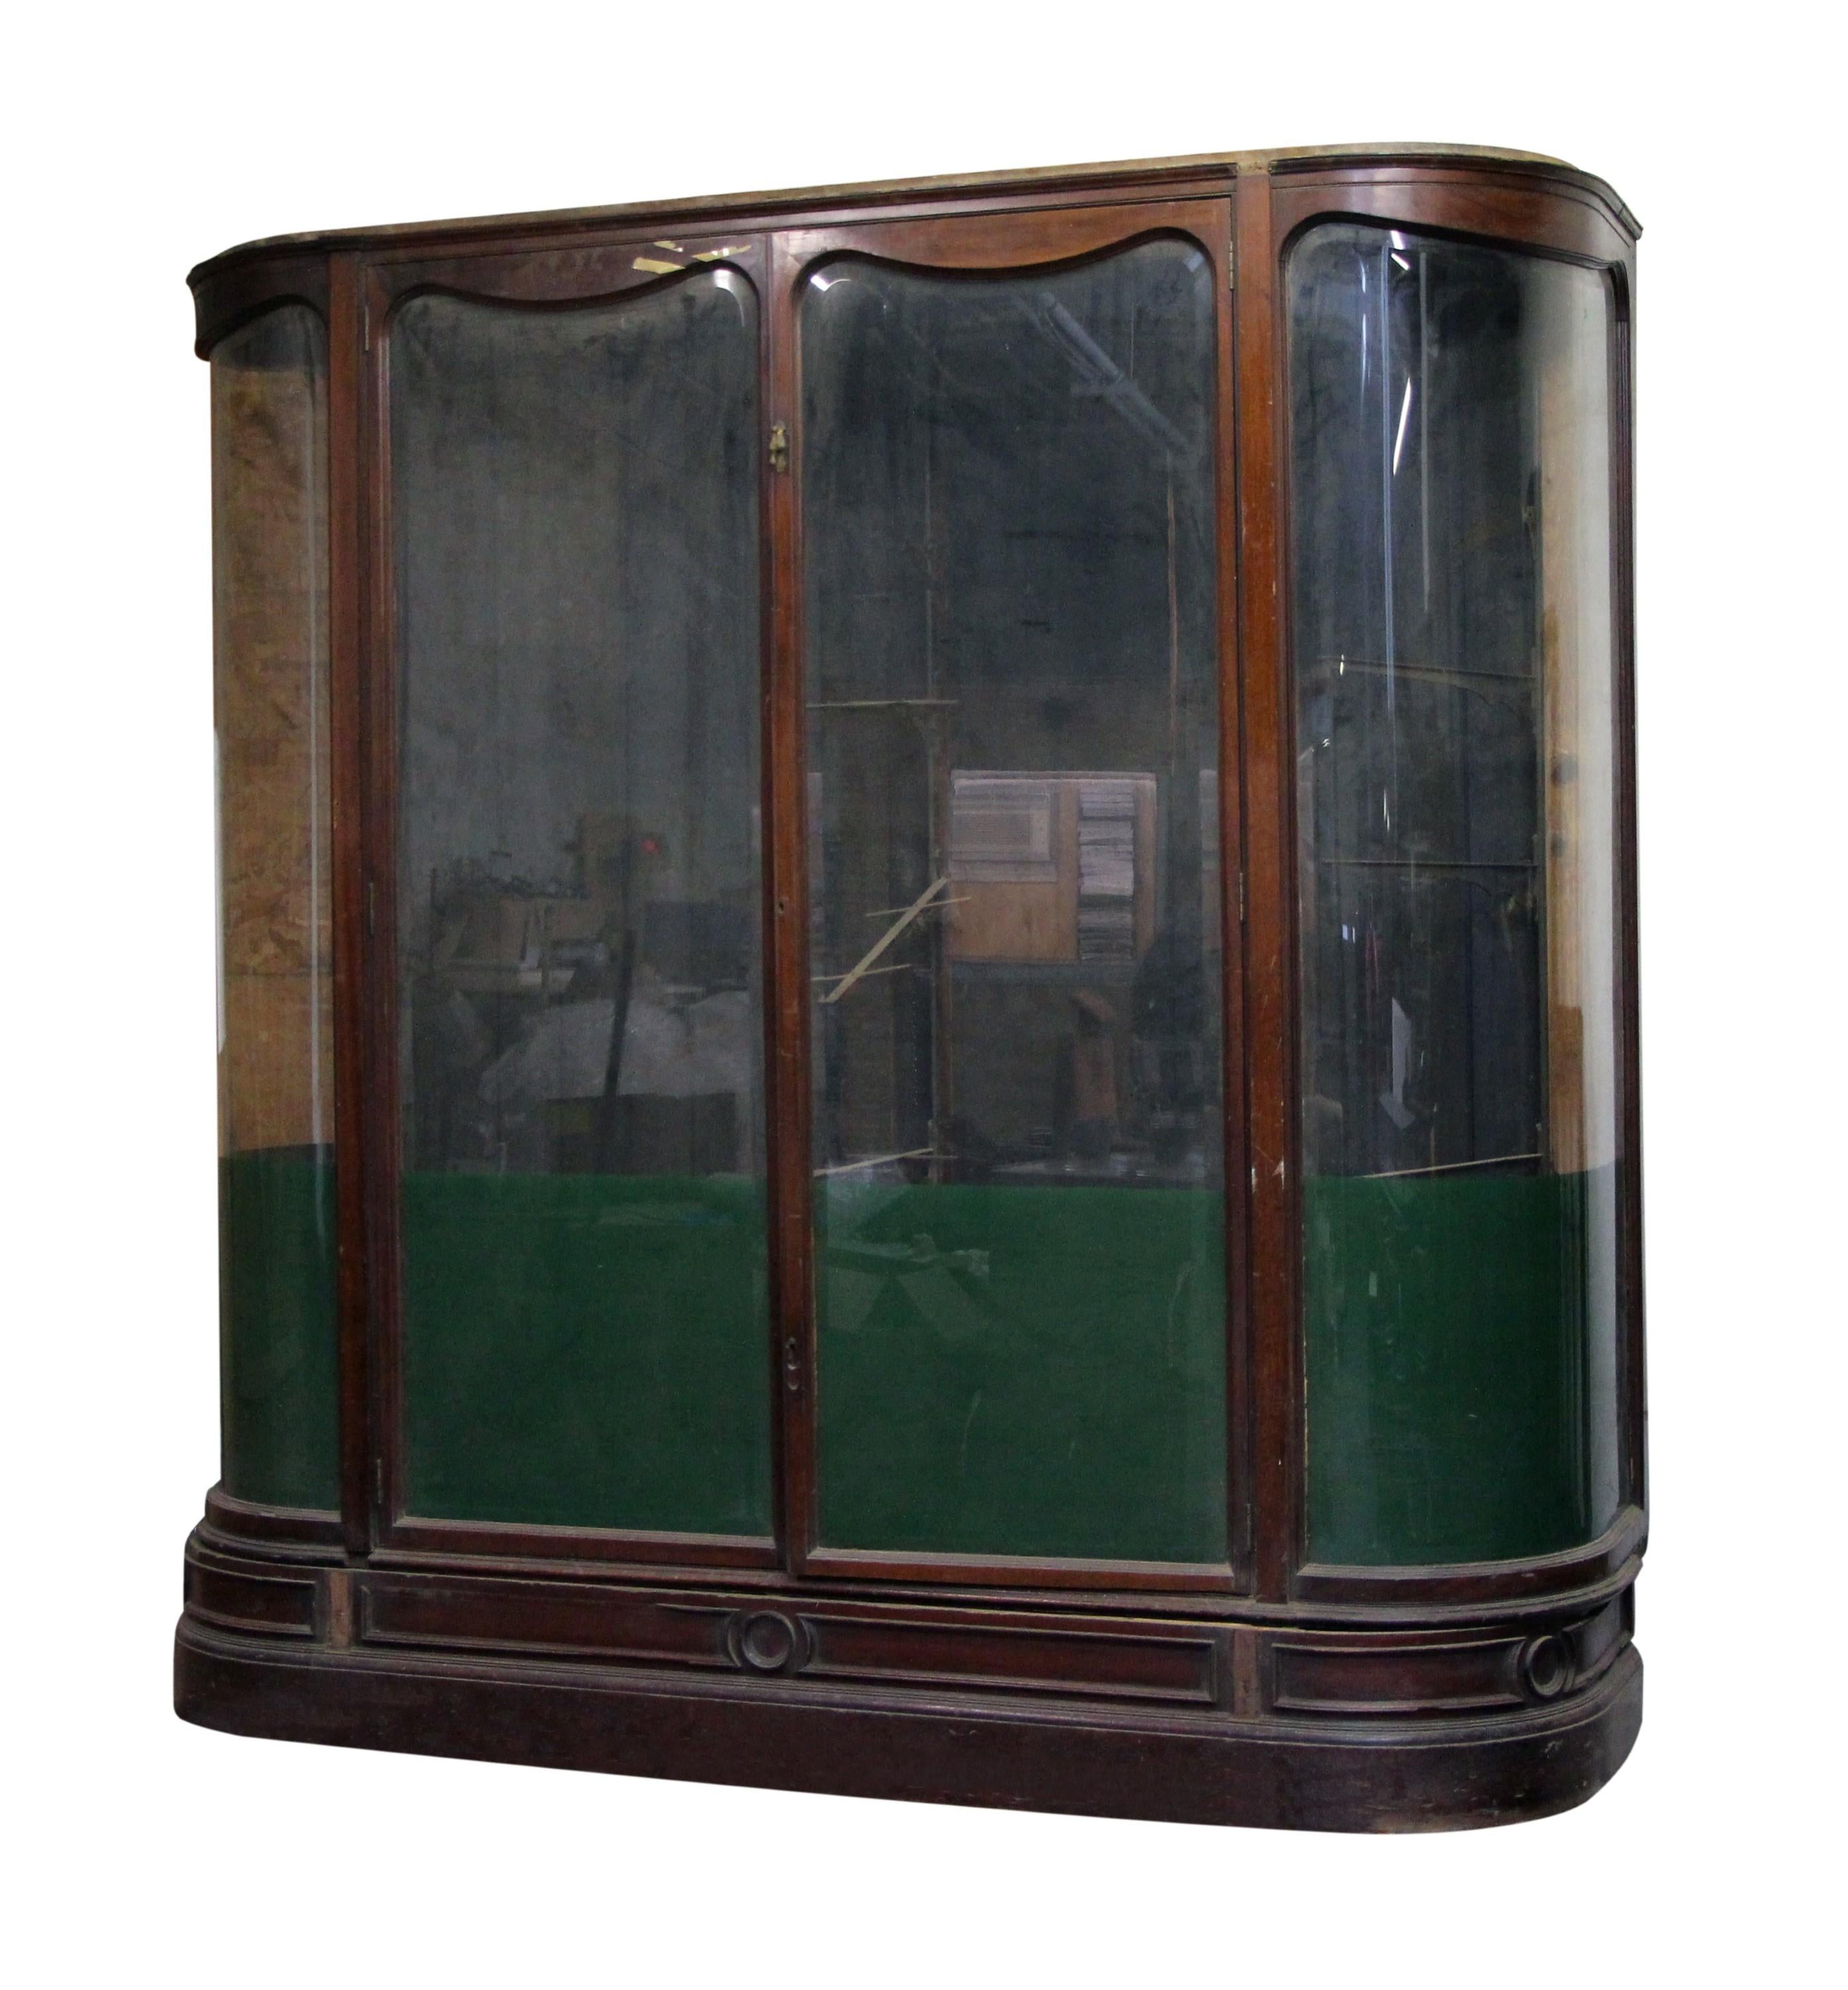 Antique English showcase made of walnut with clear beveled glass windows and curved glass sides. The double doors open the front. Inside brackets for glass shelves are not included. Minor molding damages. Please note, this item is located in our